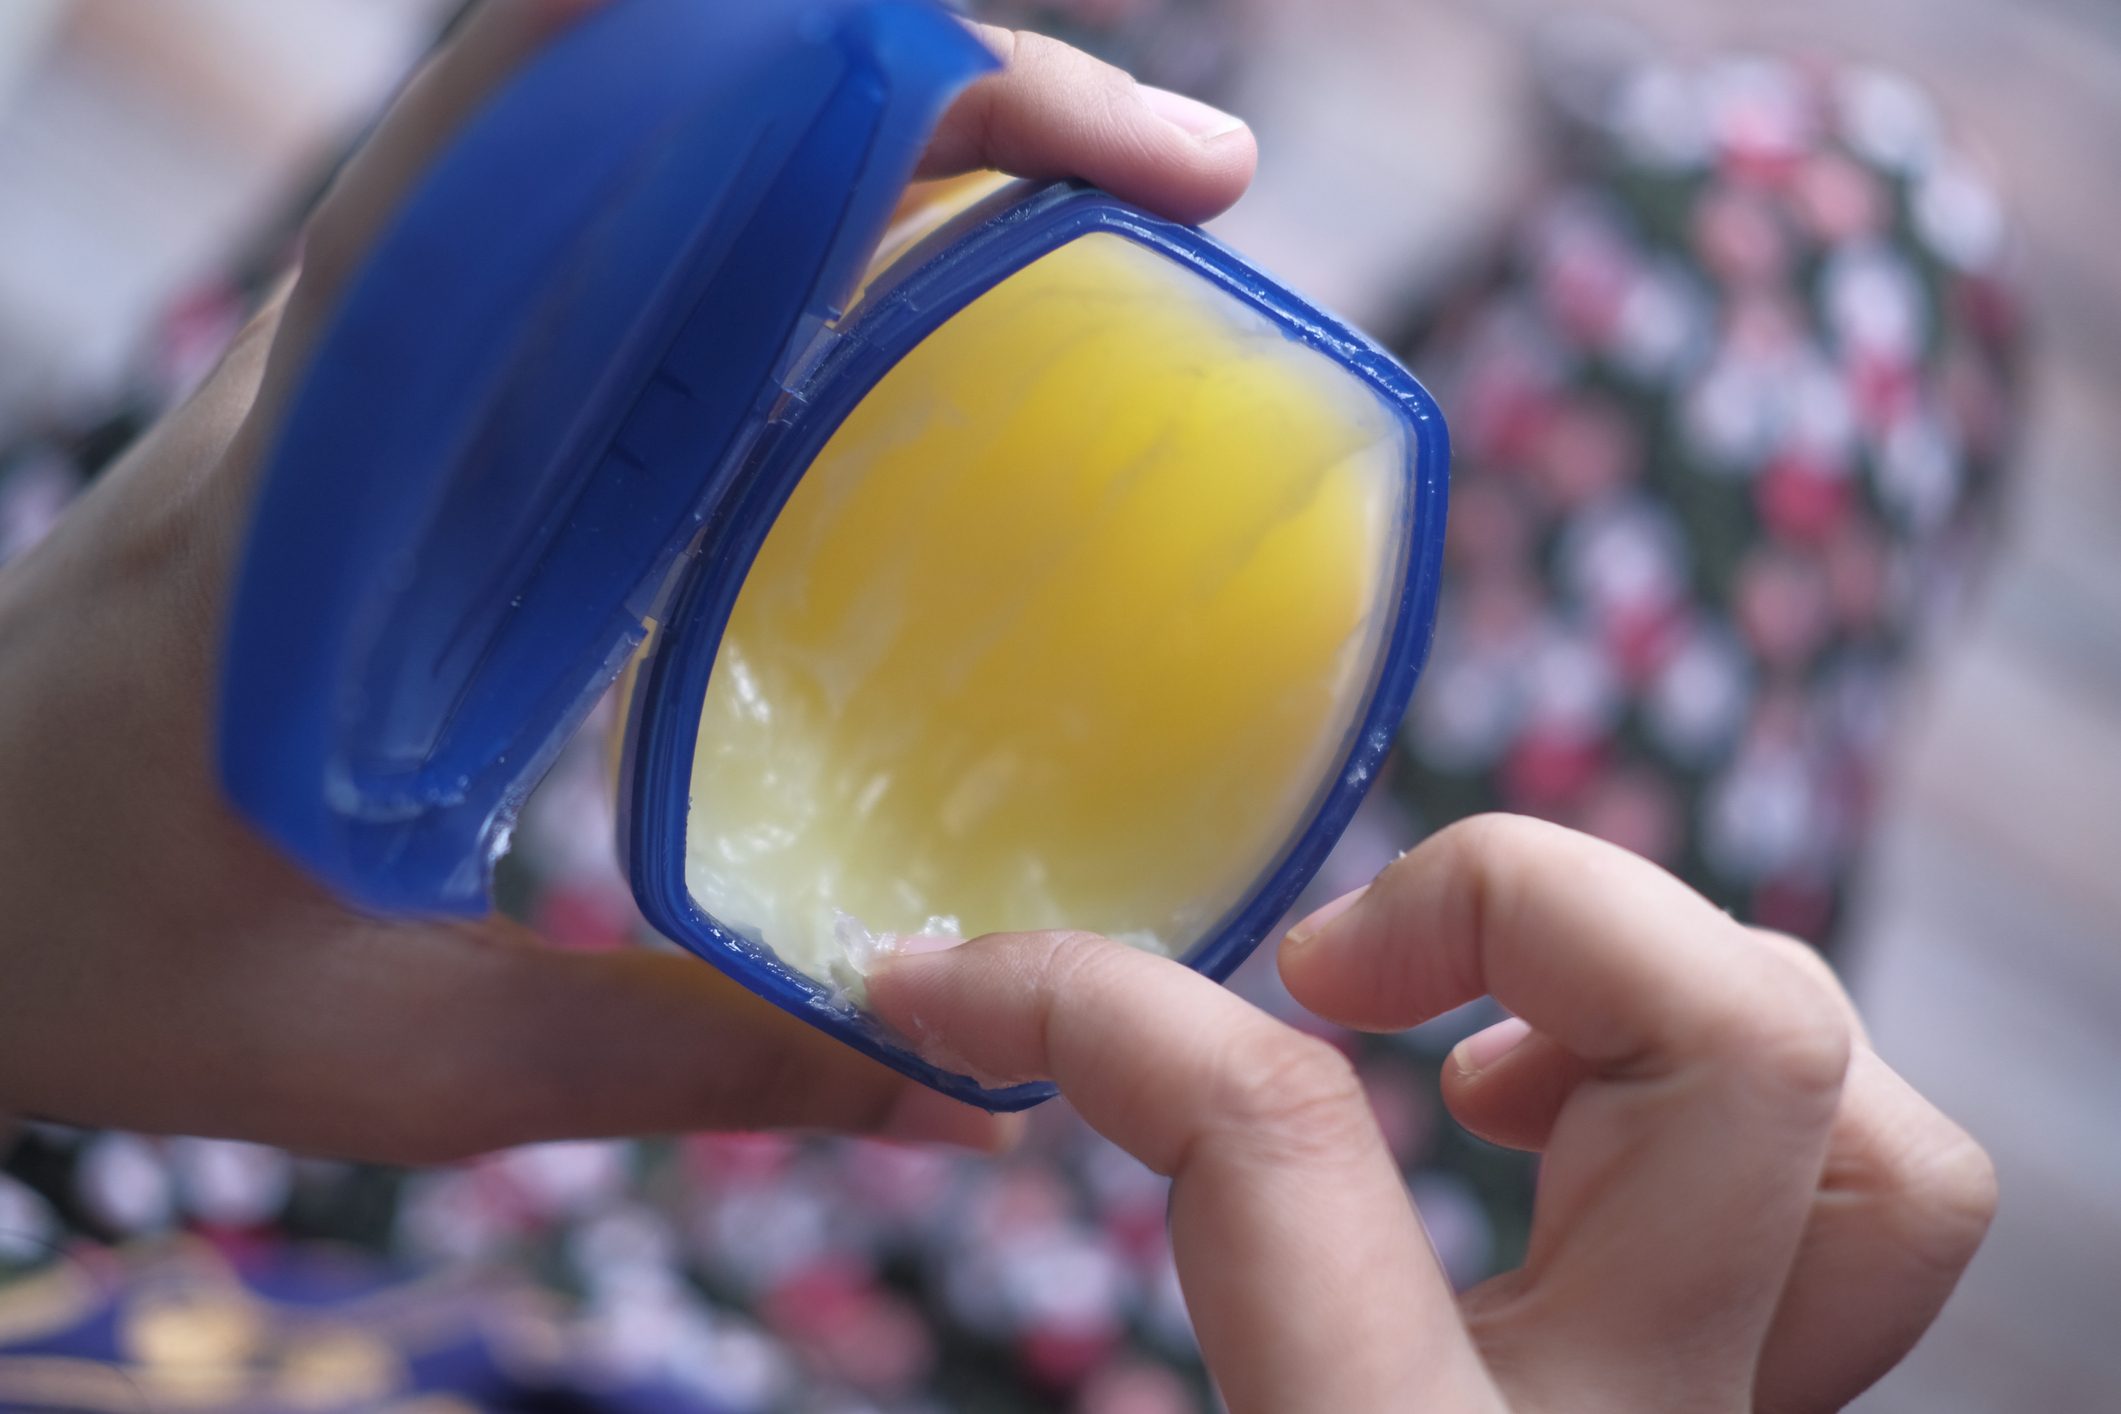 Keep Suction Cup Organizers In Place With Petroleum Jelly